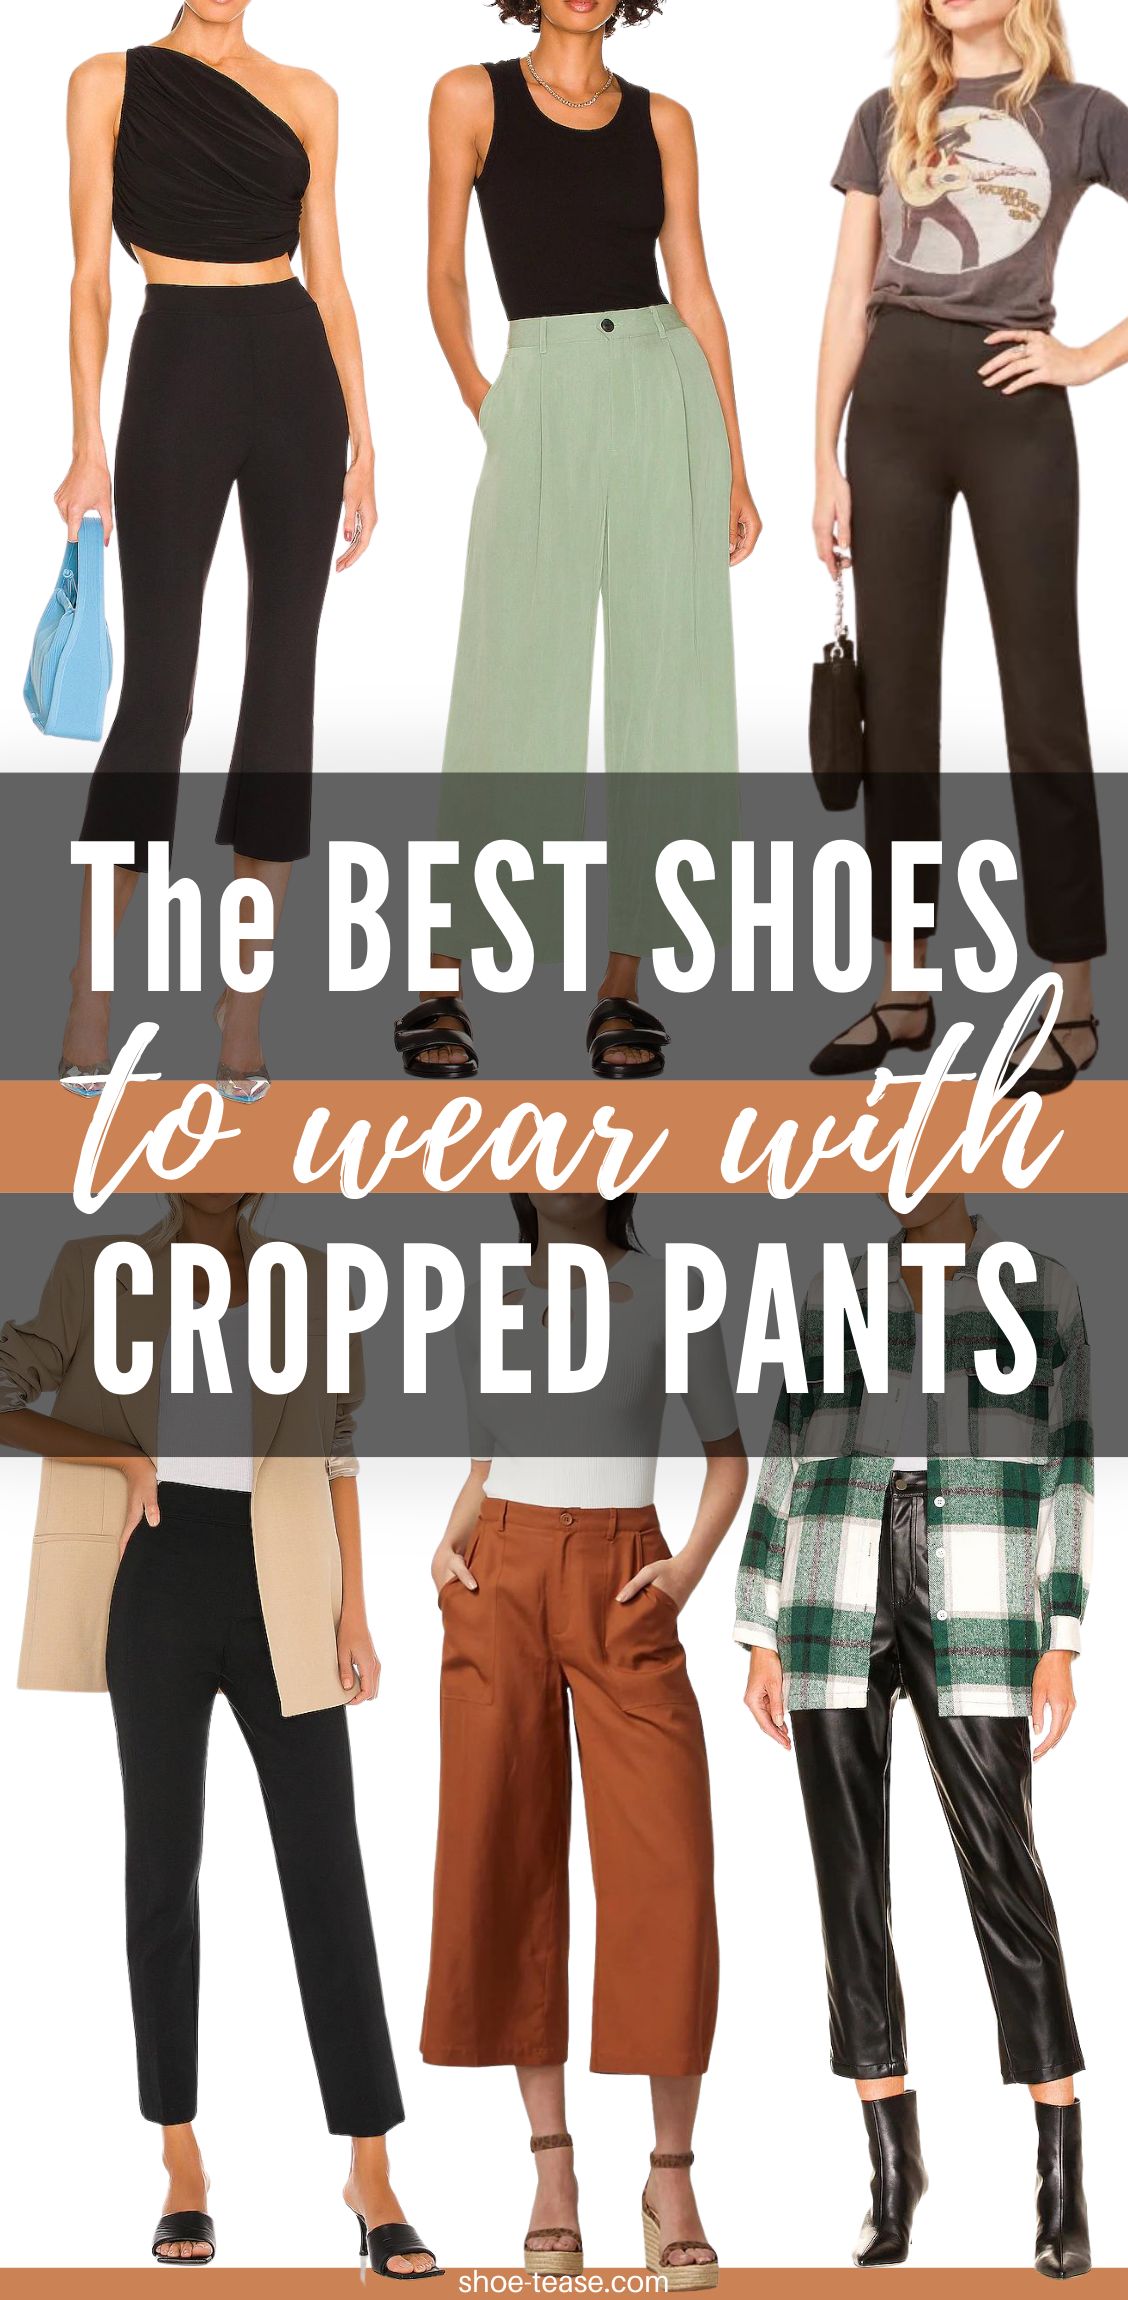 Why I Hate Capris and What to Wear Instead  The Well Dressed Life